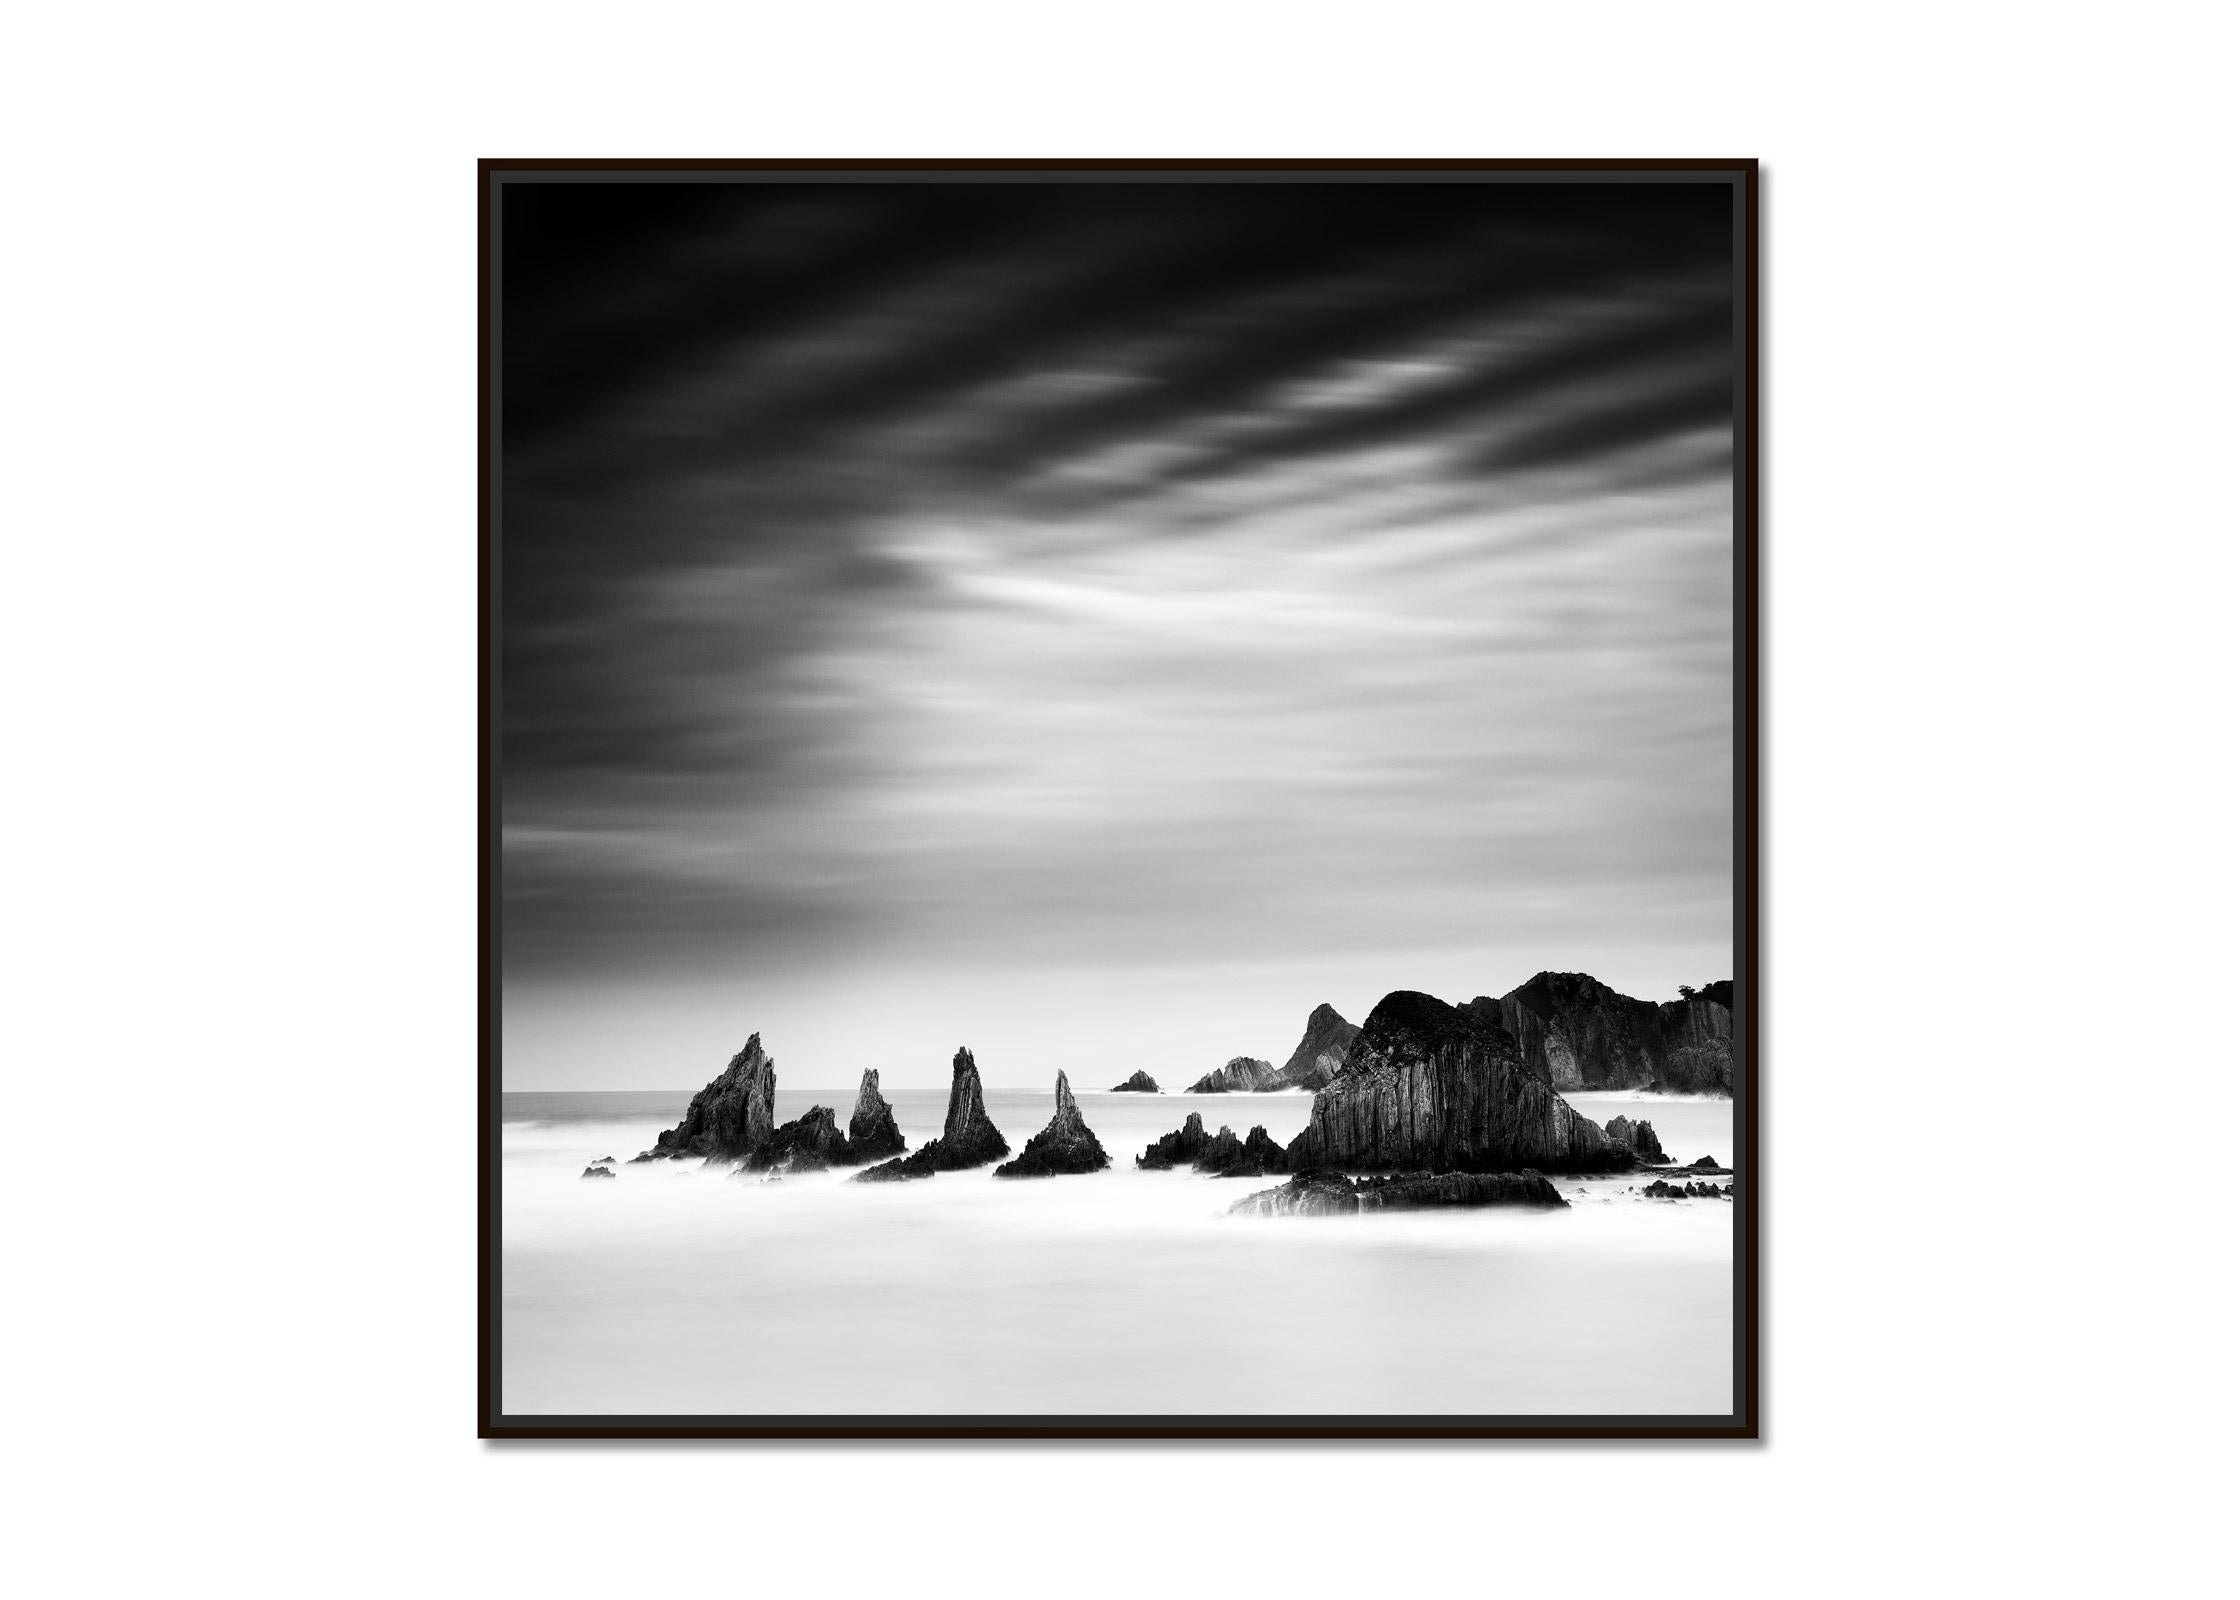 Rocky Peaks, mystical clouds, shoreline, black and white photograpy, seascape - Photograph by Gerald Berghammer